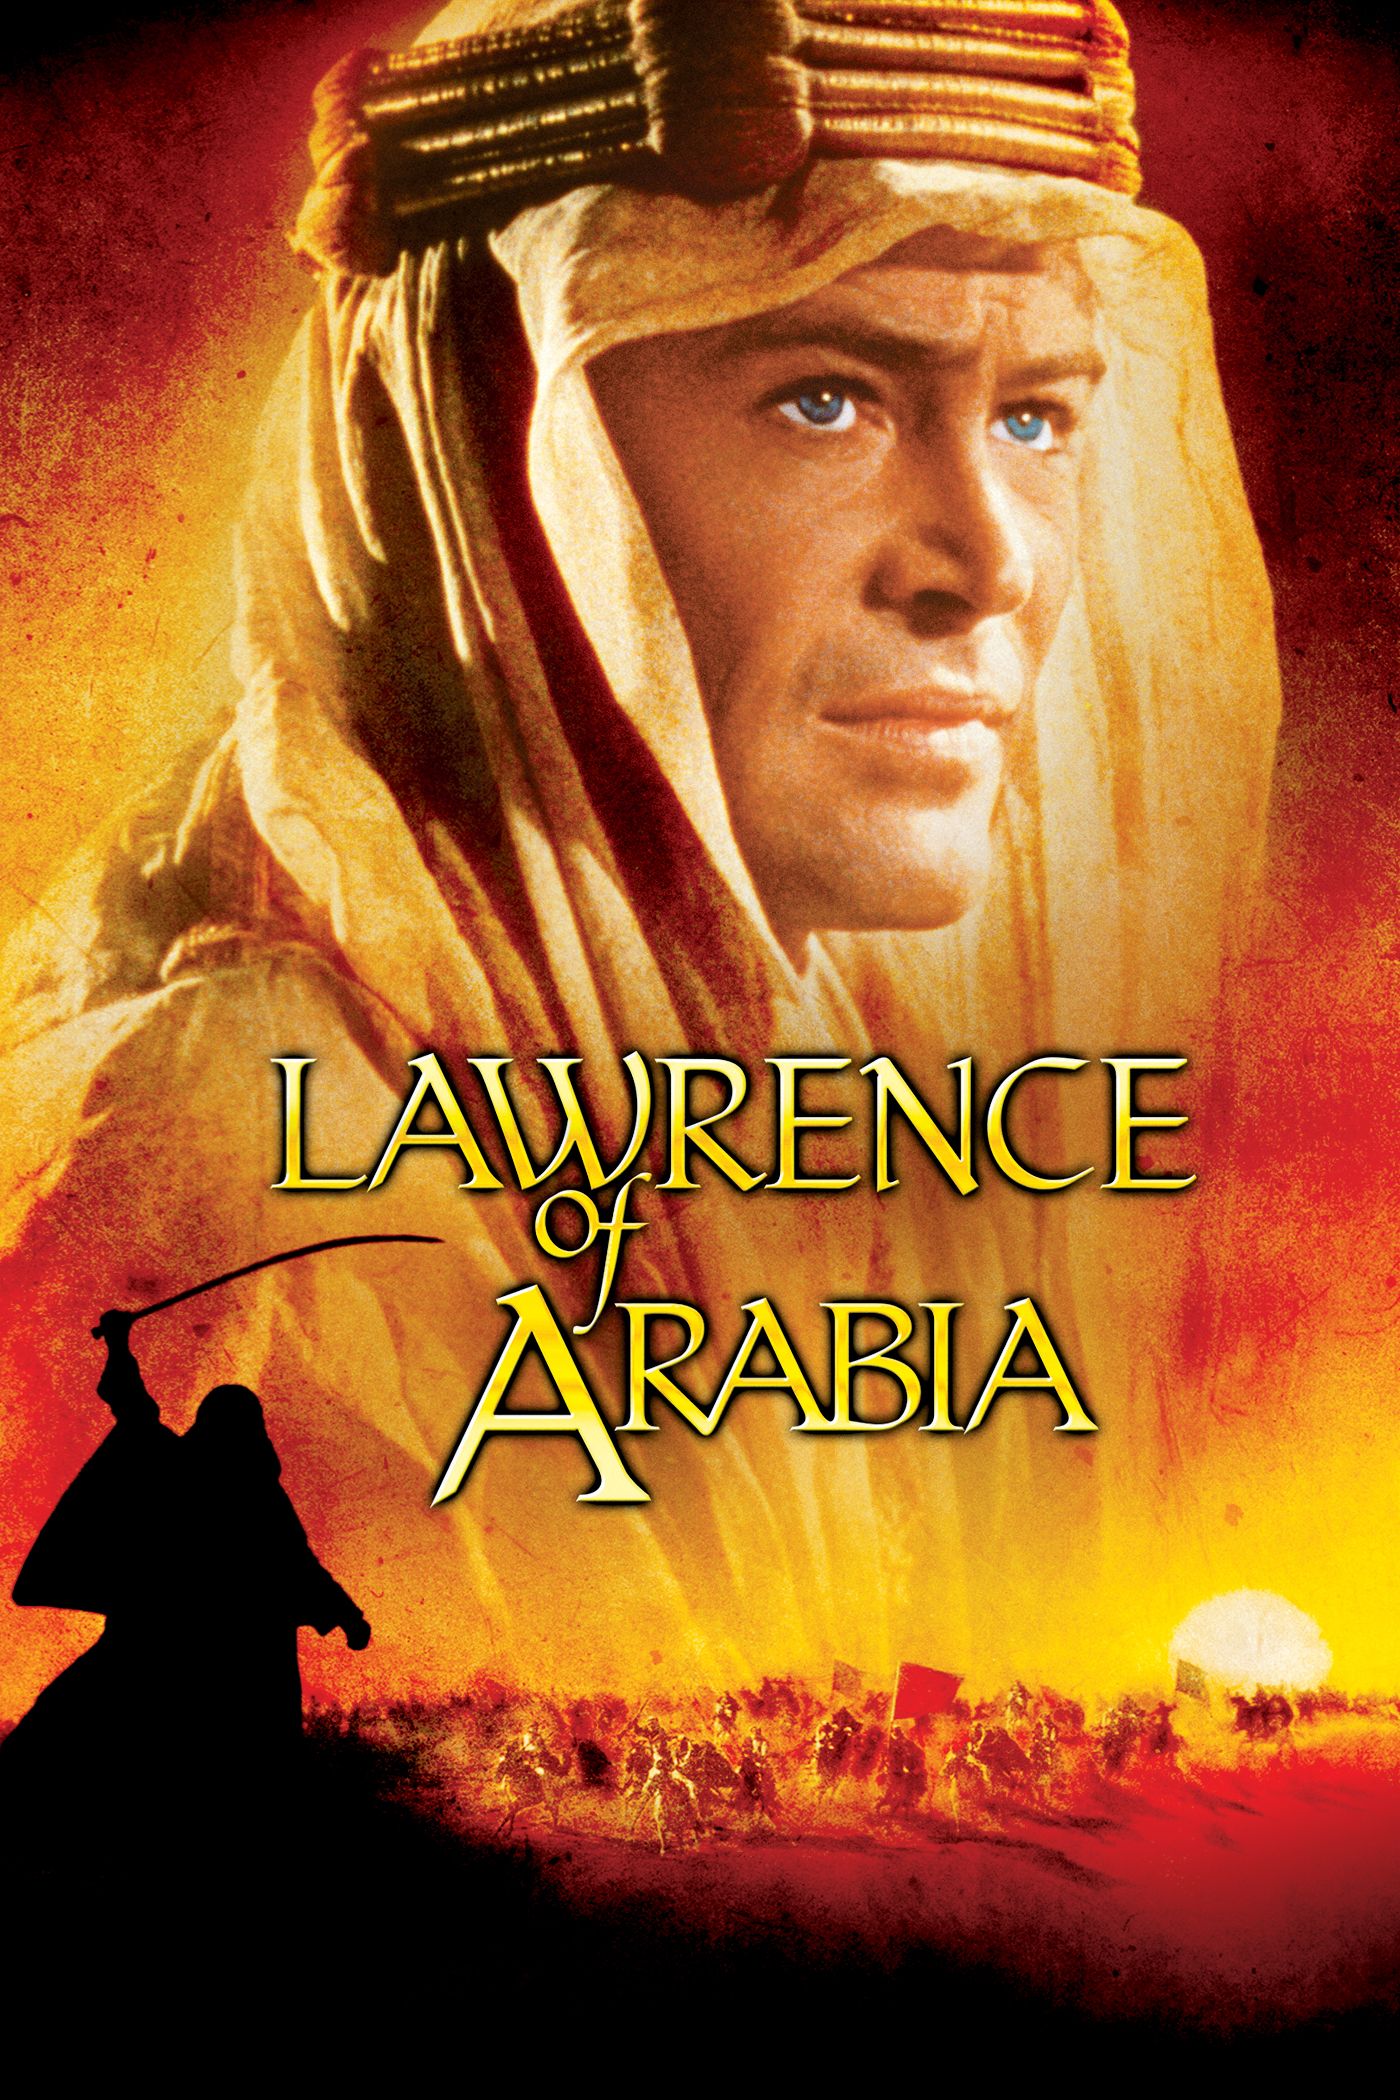 Streaming Lawrence Of Arabia 1962 Full Movies Online